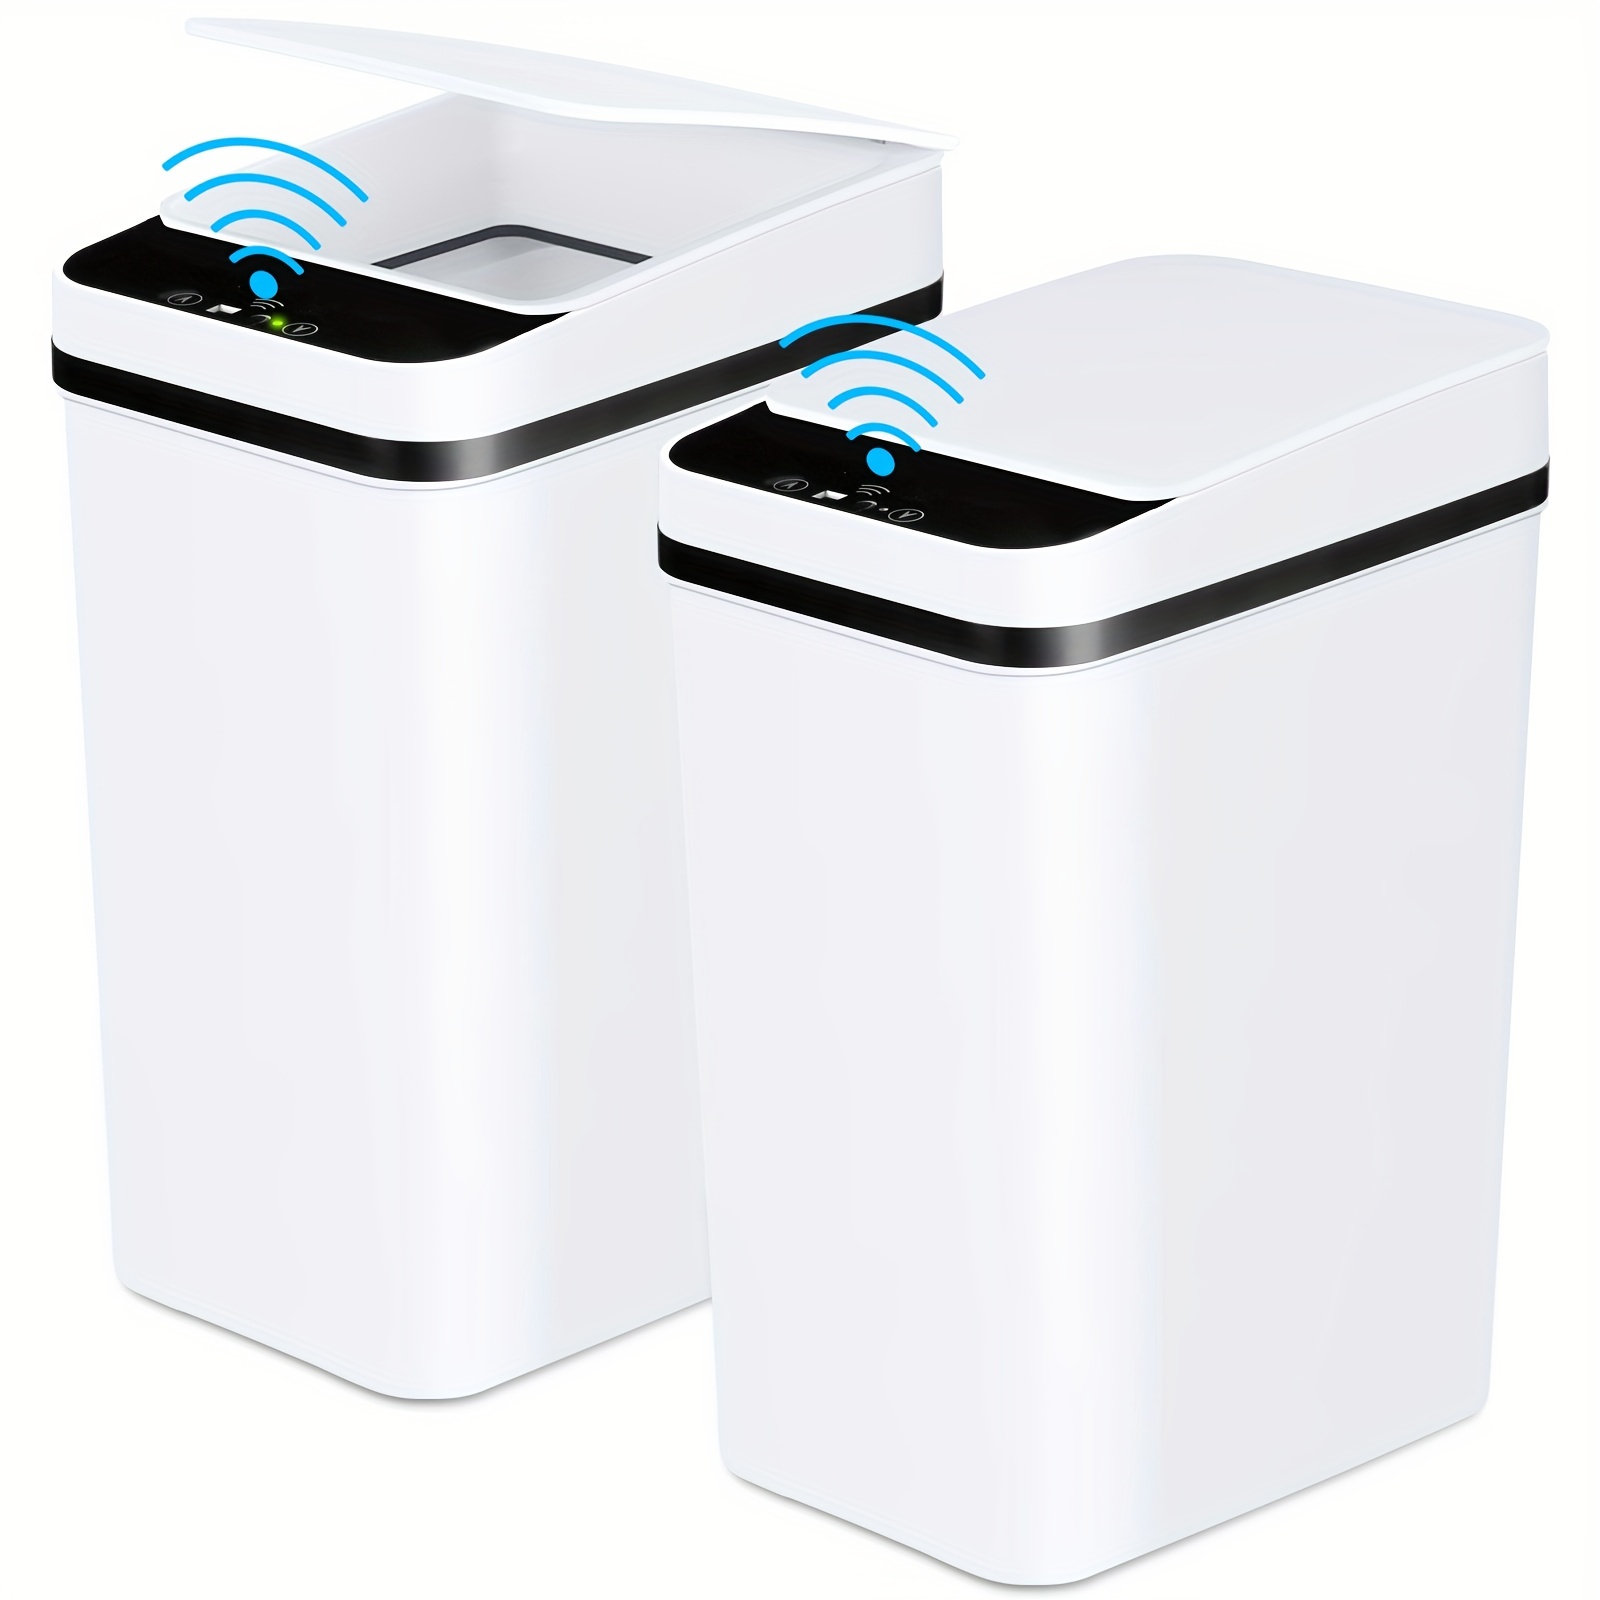 

2 Pack 2.2 Gallon Bathroom Trash Cans With Lid Touchless Automatic Motion Sensor Small Slim Garbage Can, Smart Electric Narrow Waterproof Garbage Bin For Bedroom Office Kitchen (white)